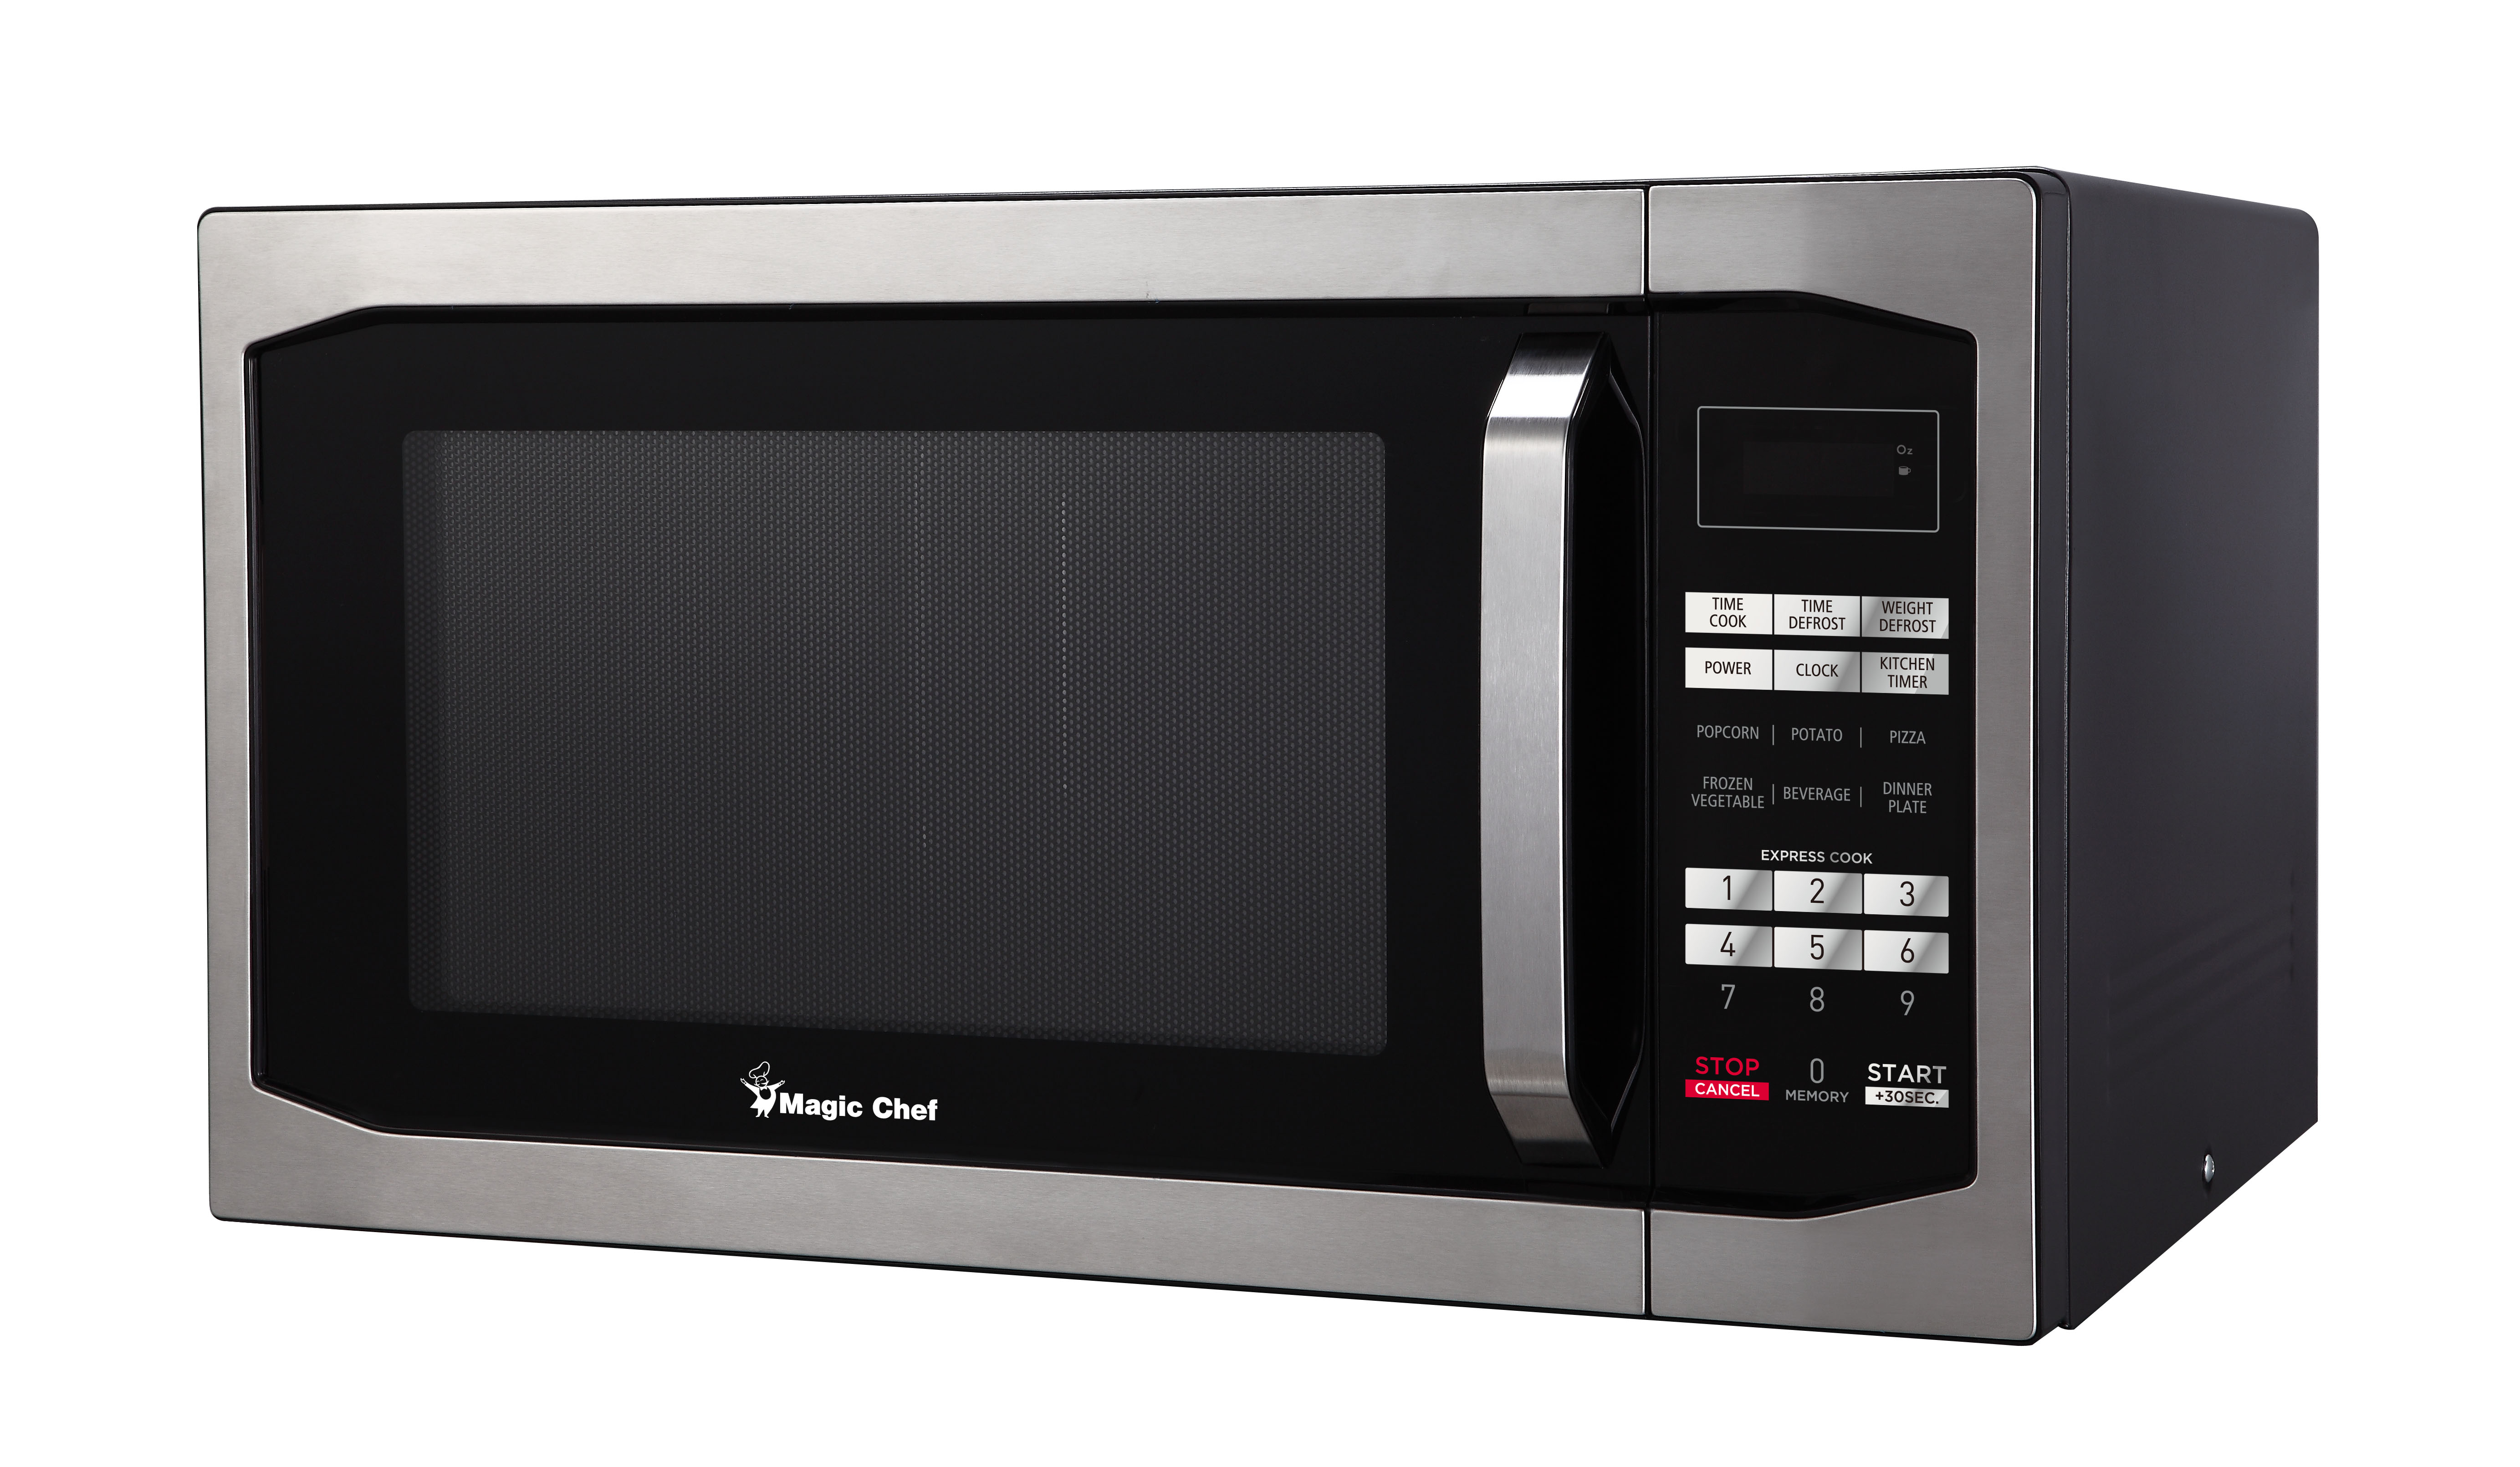 Magic Chef MCM1611ST 1100W Oven, 1.6 cu.ft, Stainless Steel Microwave